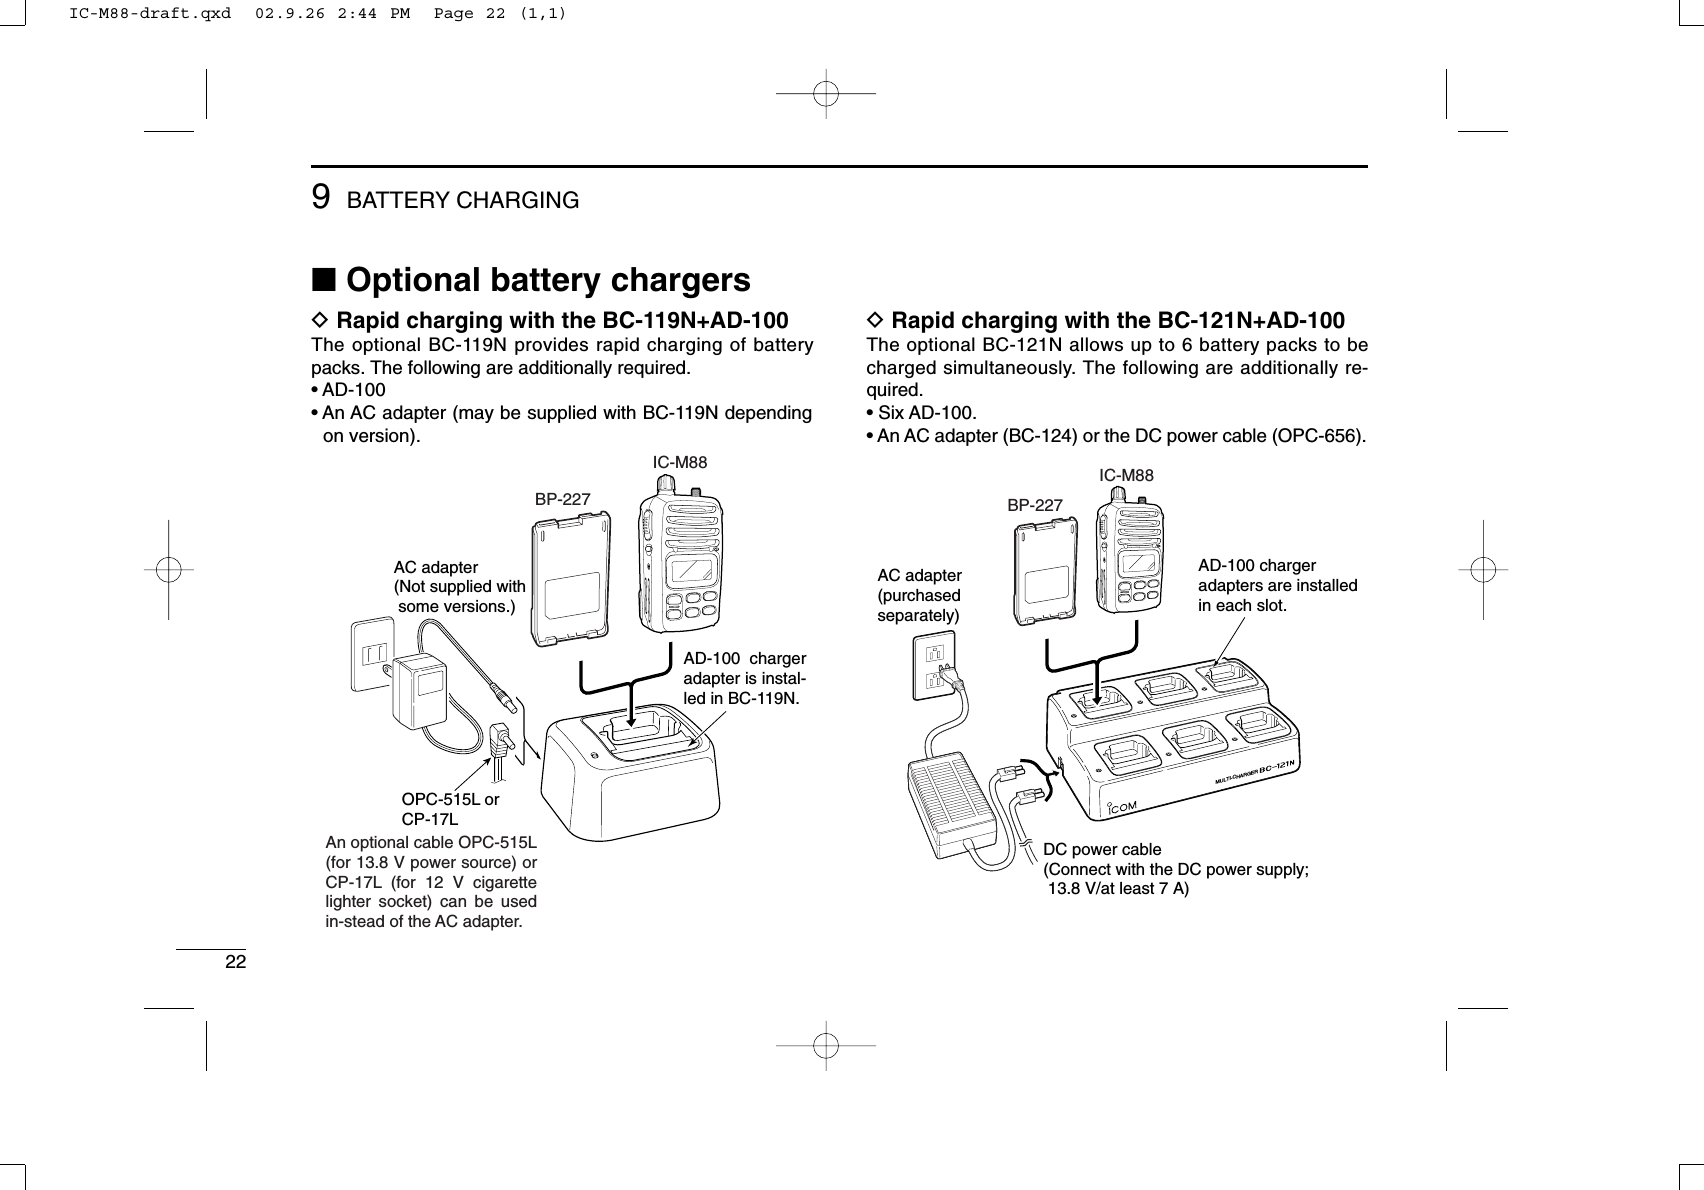 22DRapid charging with the BC-121N+AD-100The optional BC-121N allows up to 6 battery packs to becharged simultaneously. The following are additionally re-quired.• Six AD-100.• An AC adapter (BC-124) or the DC power cable (OPC-656).MULTI-CHARGERDC power cable(Connect with the DC power supply;  13.8 V/at least 7 A)AC adapter(purchasedseparately)AD-100 chargeradapters are installedin each slot.BP-227IC-M88■Optional battery chargersDRapid charging with the BC-119N+AD-100The optional BC-119N provides rapid charging of batterypacks. The following are additionally required.• AD-100• An AC adapter (may be supplied with BC-119N dependingon version).AC adapter(Not supplied with  some versions.)OPC-515L orCP-17LAD-100 charger adapter is instal-led in BC-119N.BP-227IC-M88An optional cable OPC-515L (for 13.8 V power source) or CP-17L (for 12 V cigarette lighter socket) can be used in-stead of the AC adapter.9BATTERY CHARGINGIC-M88-draft.qxd  02.9.26 2:44 PM  Page 22 (1,1)